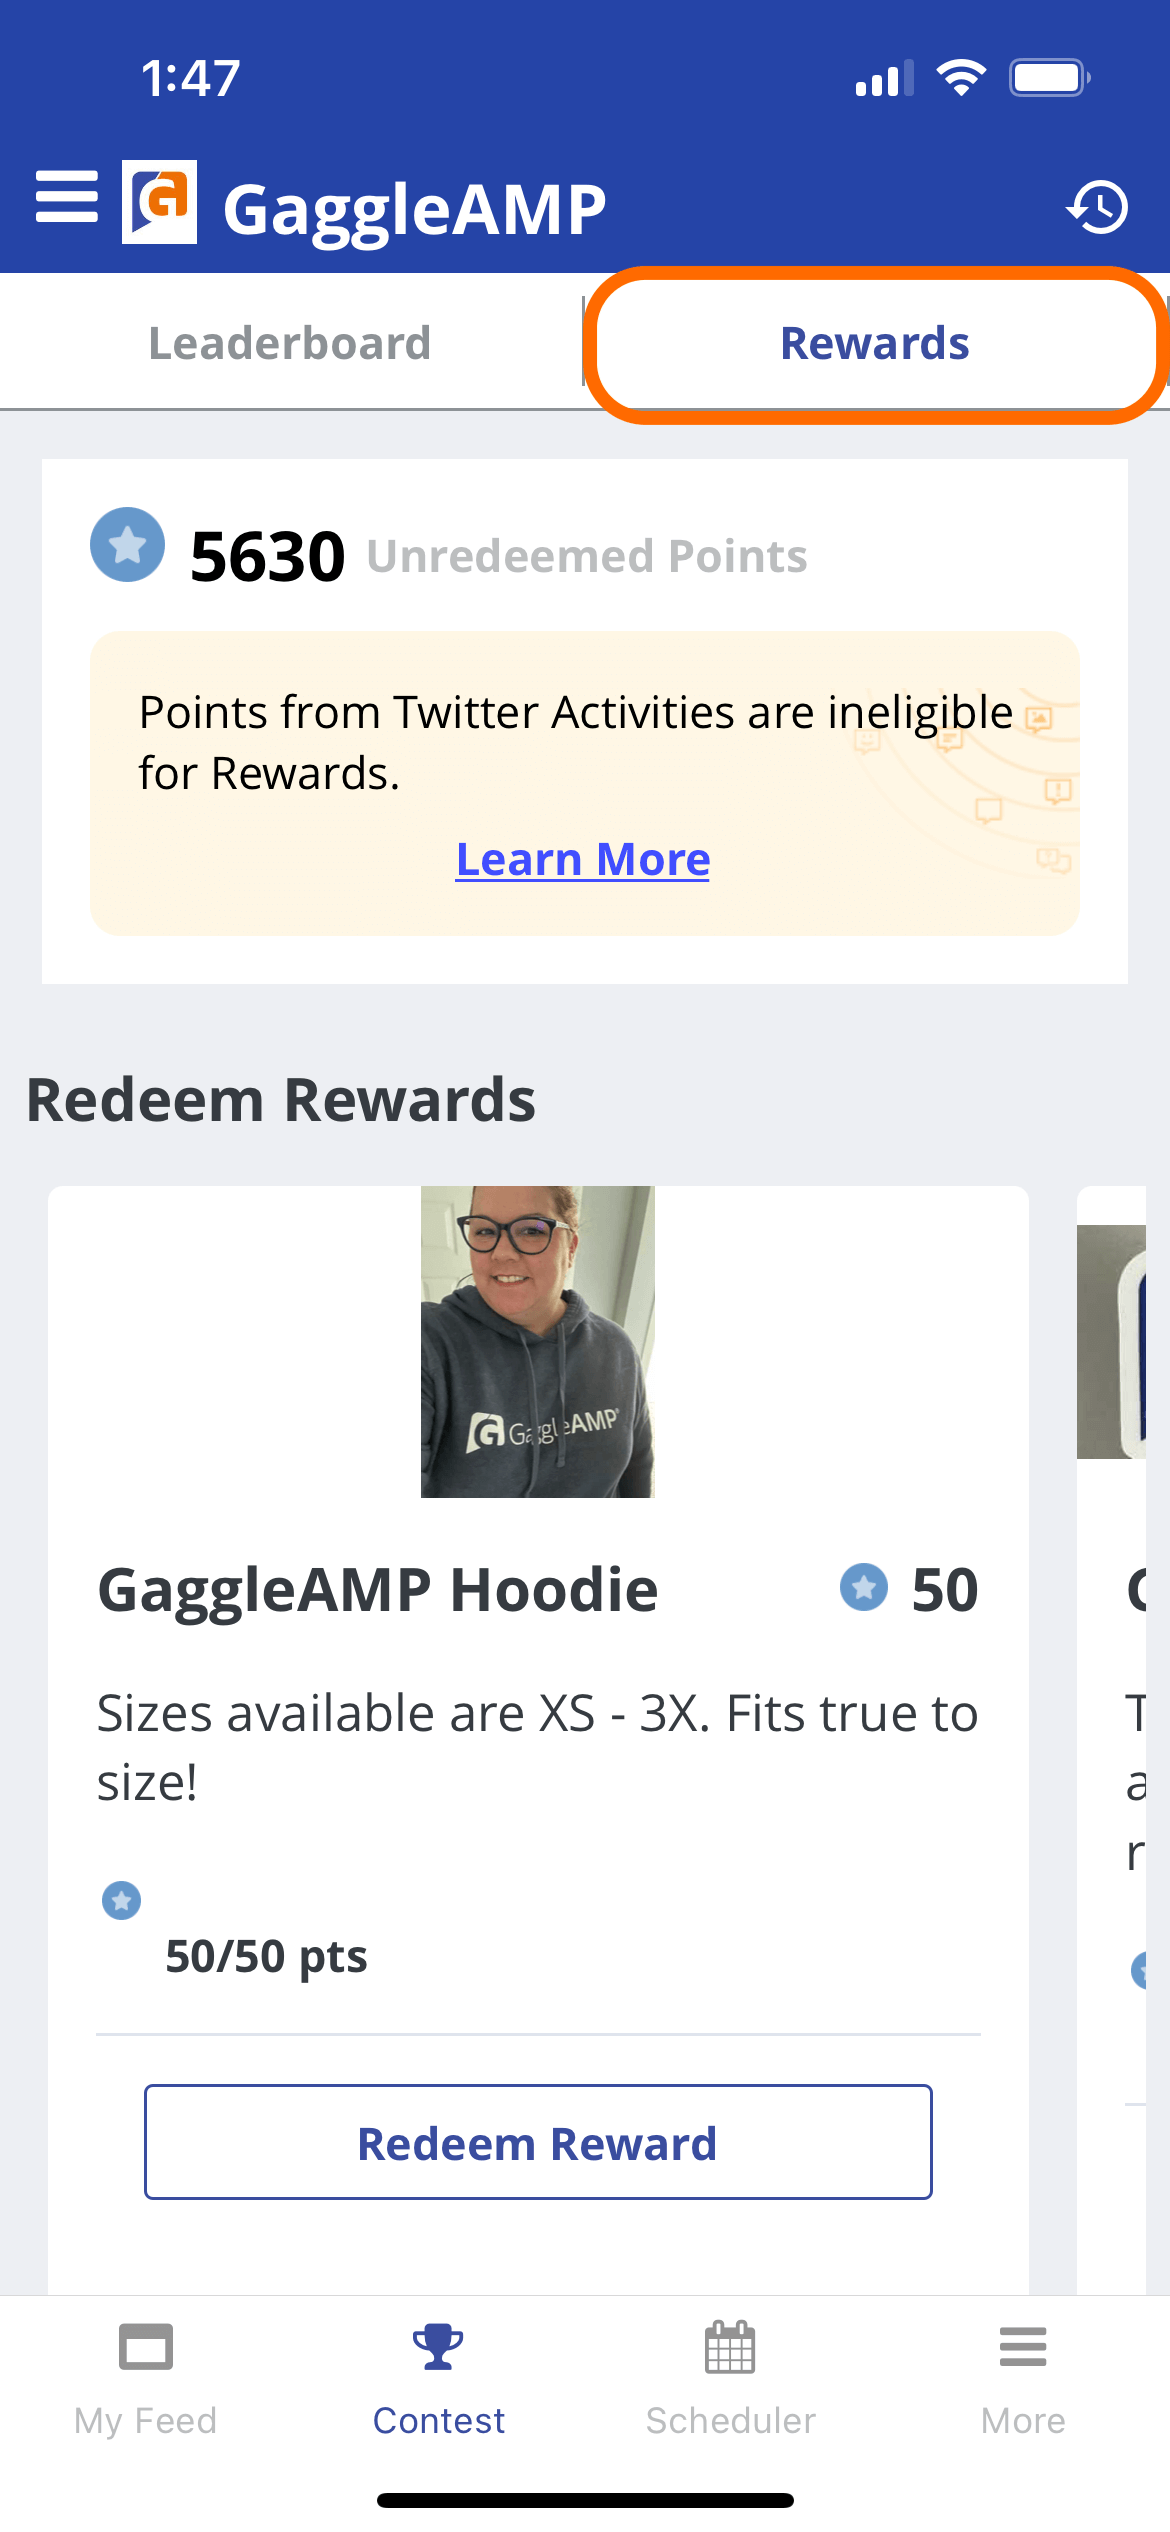 Reward_Selection_on_Mobile_GaggleAMP.png